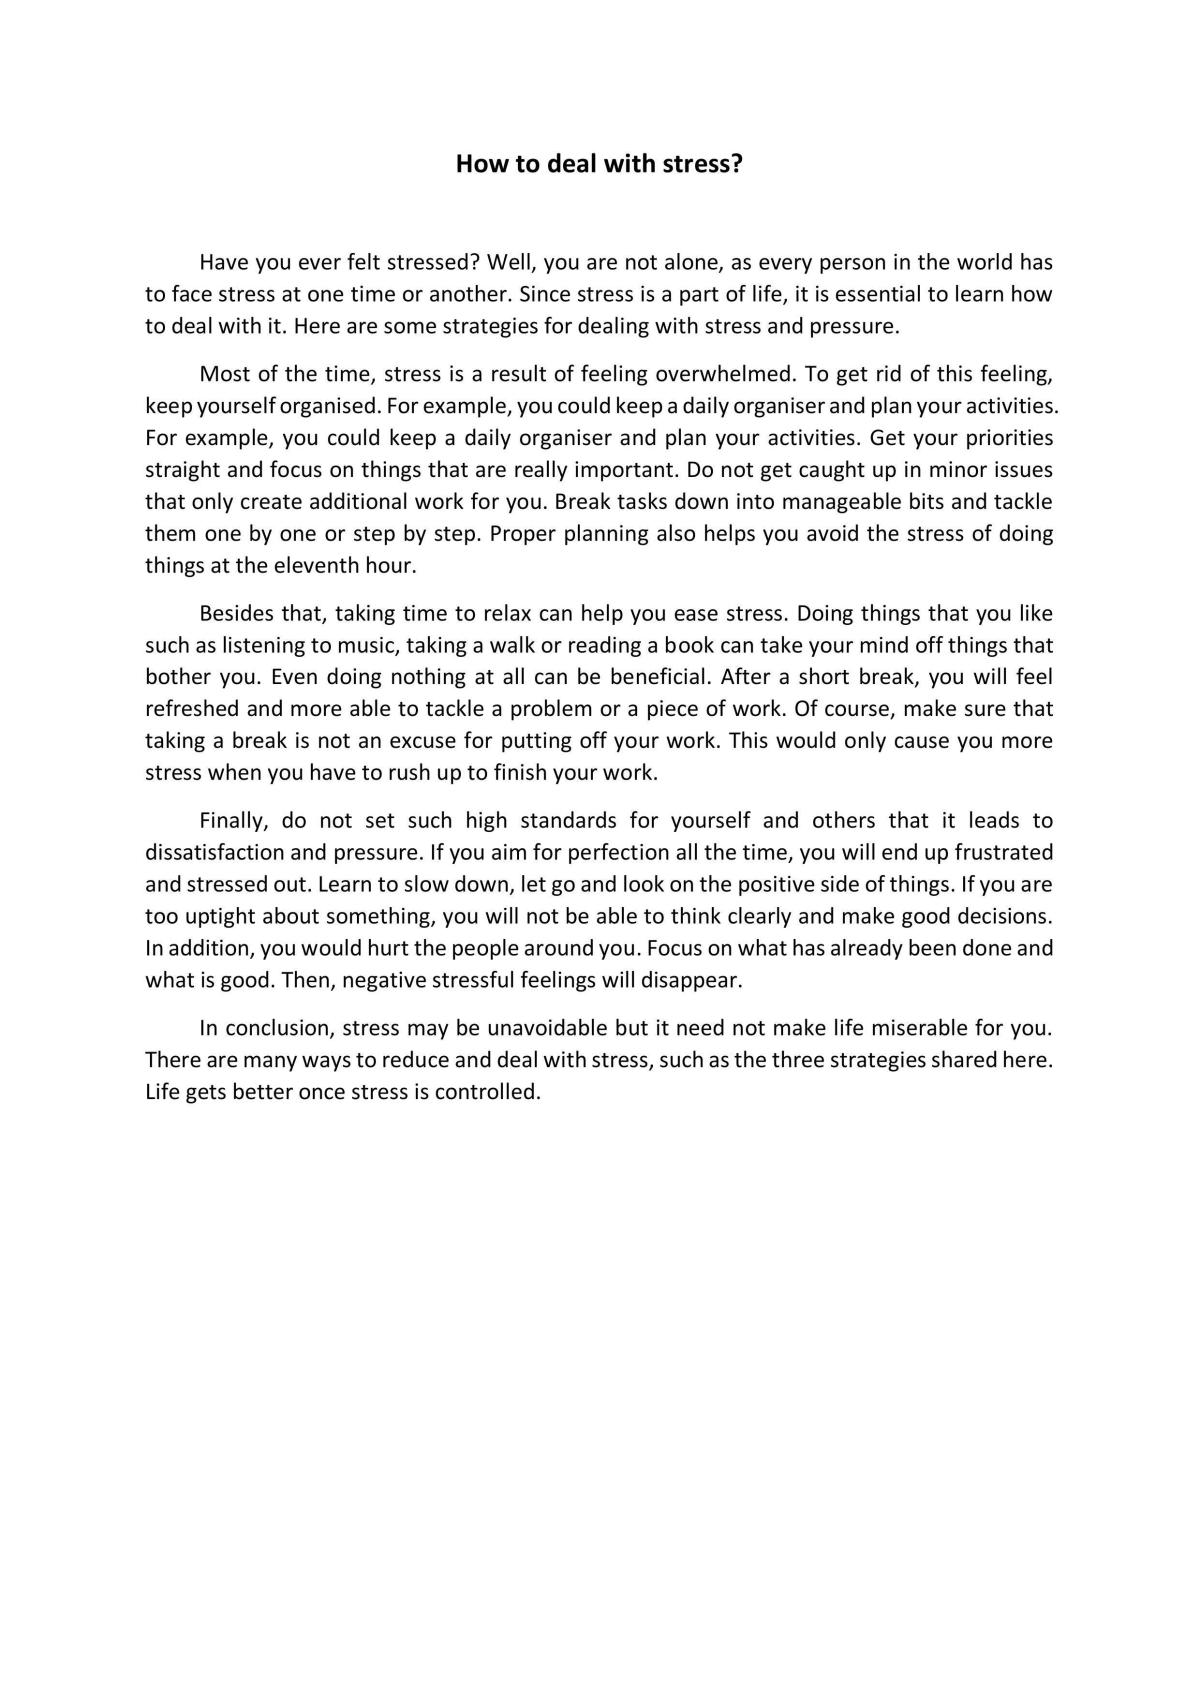 English essay for SPM  - Page 1